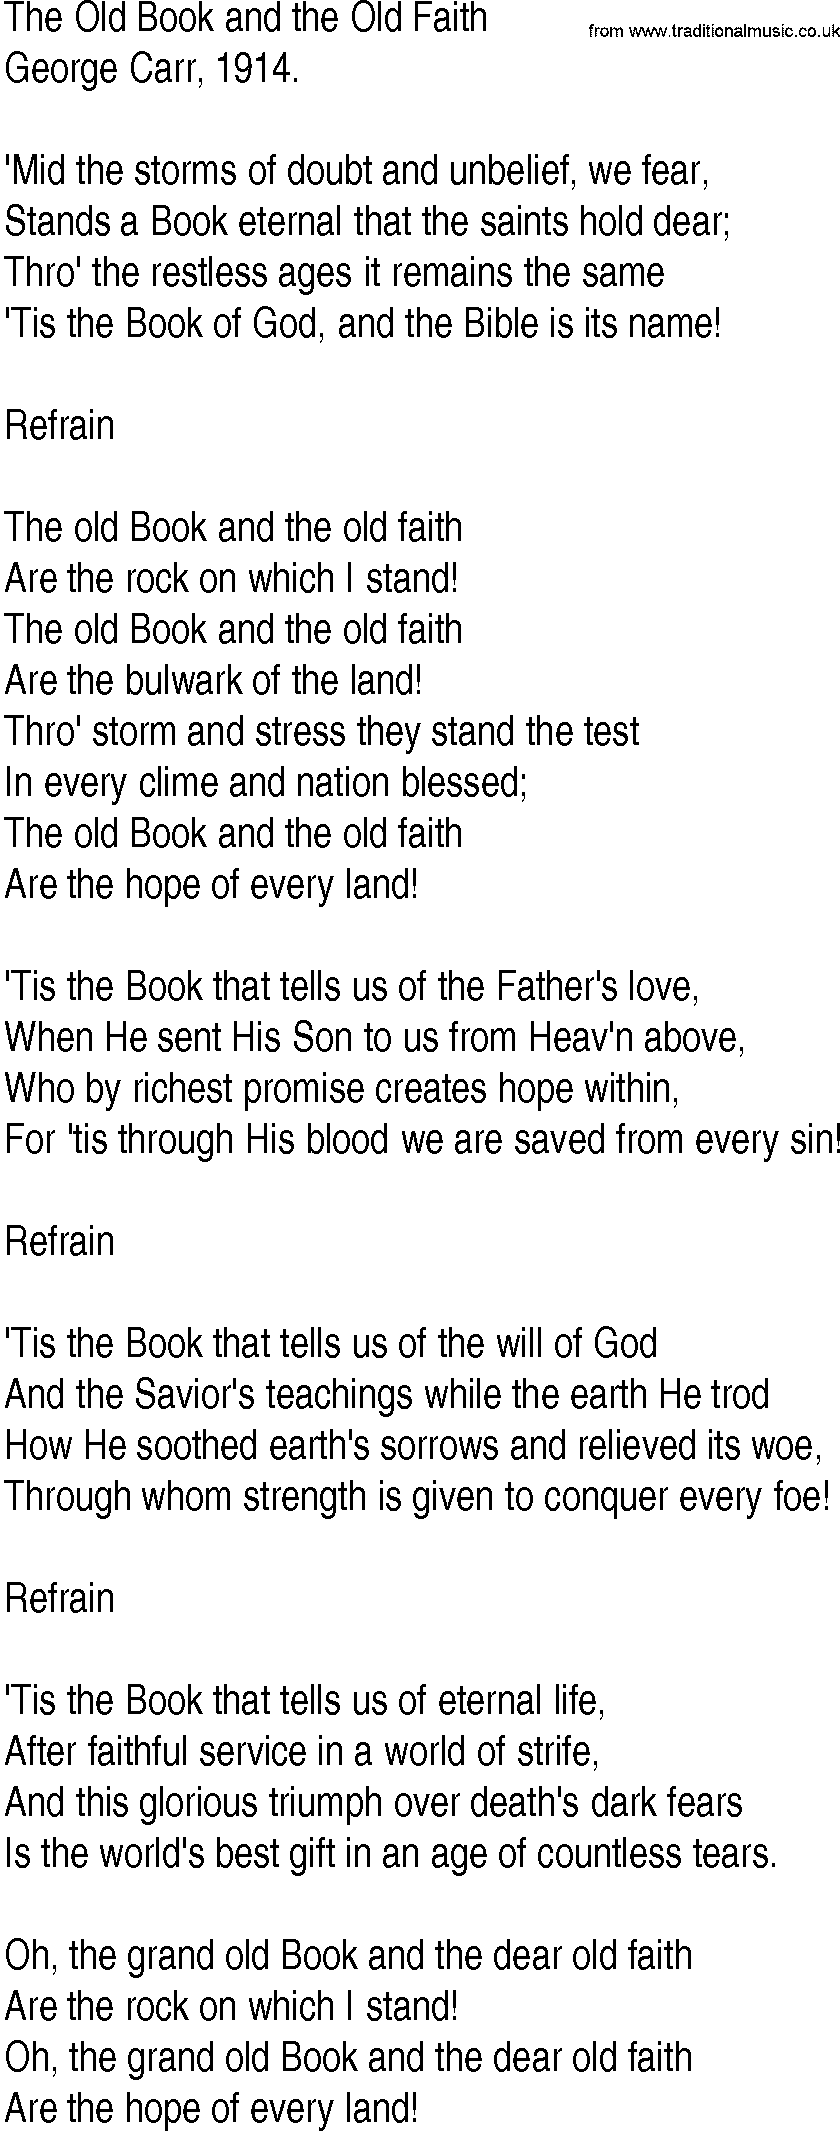 Hymn and Gospel Song: The Old Book and the Old Faith by George Carr lyrics